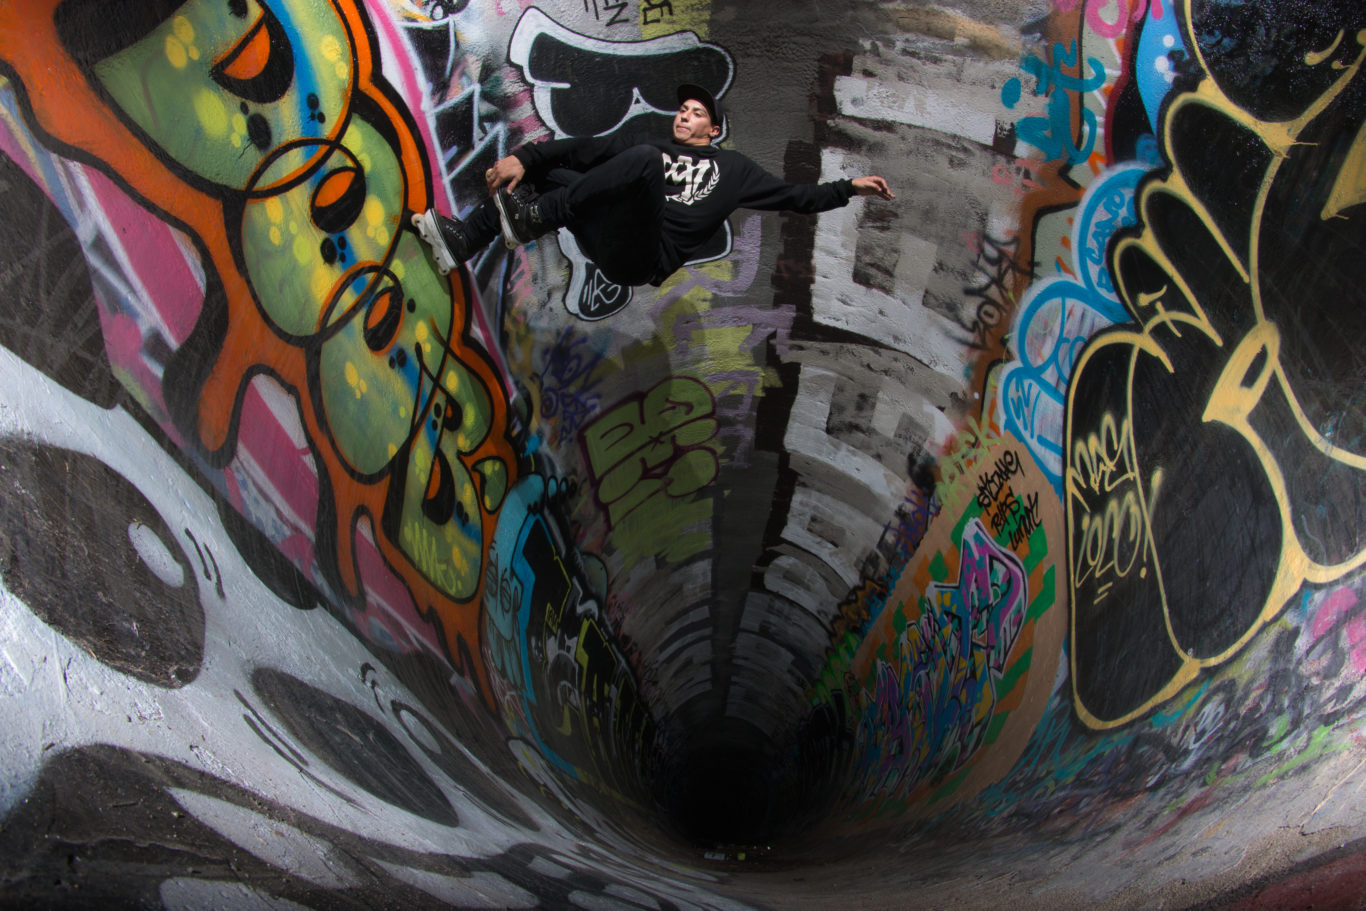 Victor Arias - Wall Stall - Photograph by Erick Garcia